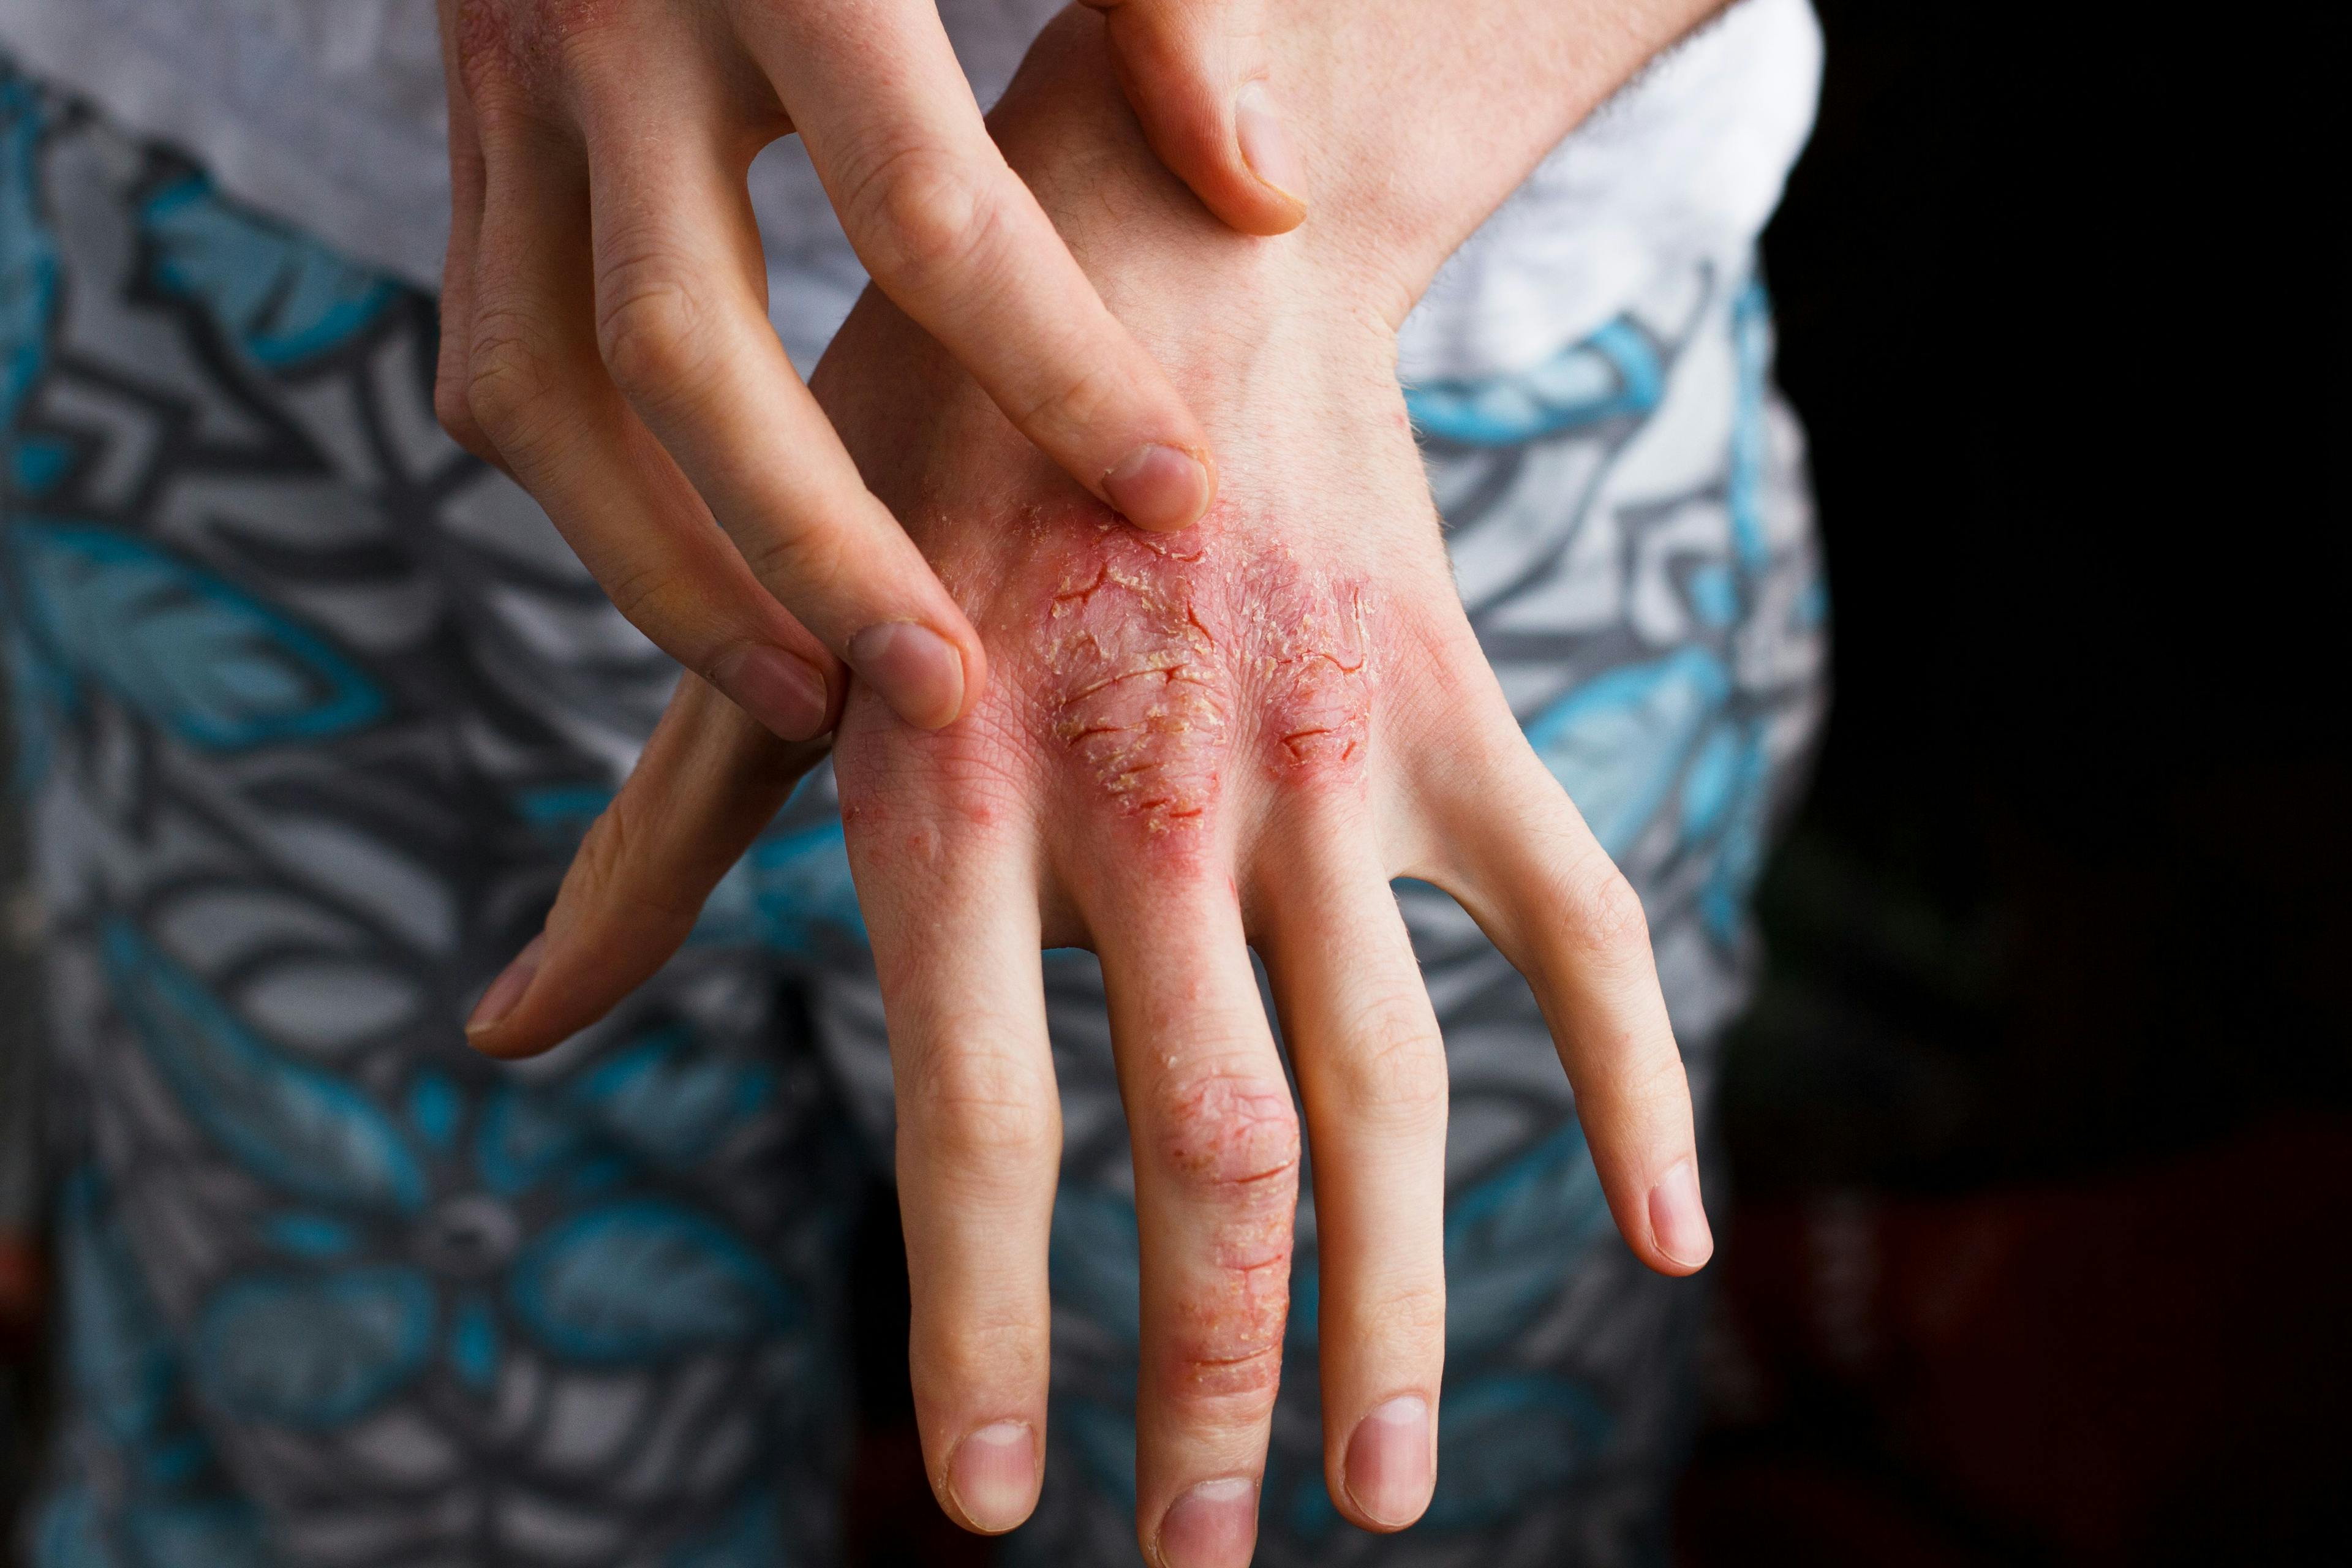 Apremilast may significantly, safely benefit severe pediatric psoriasis